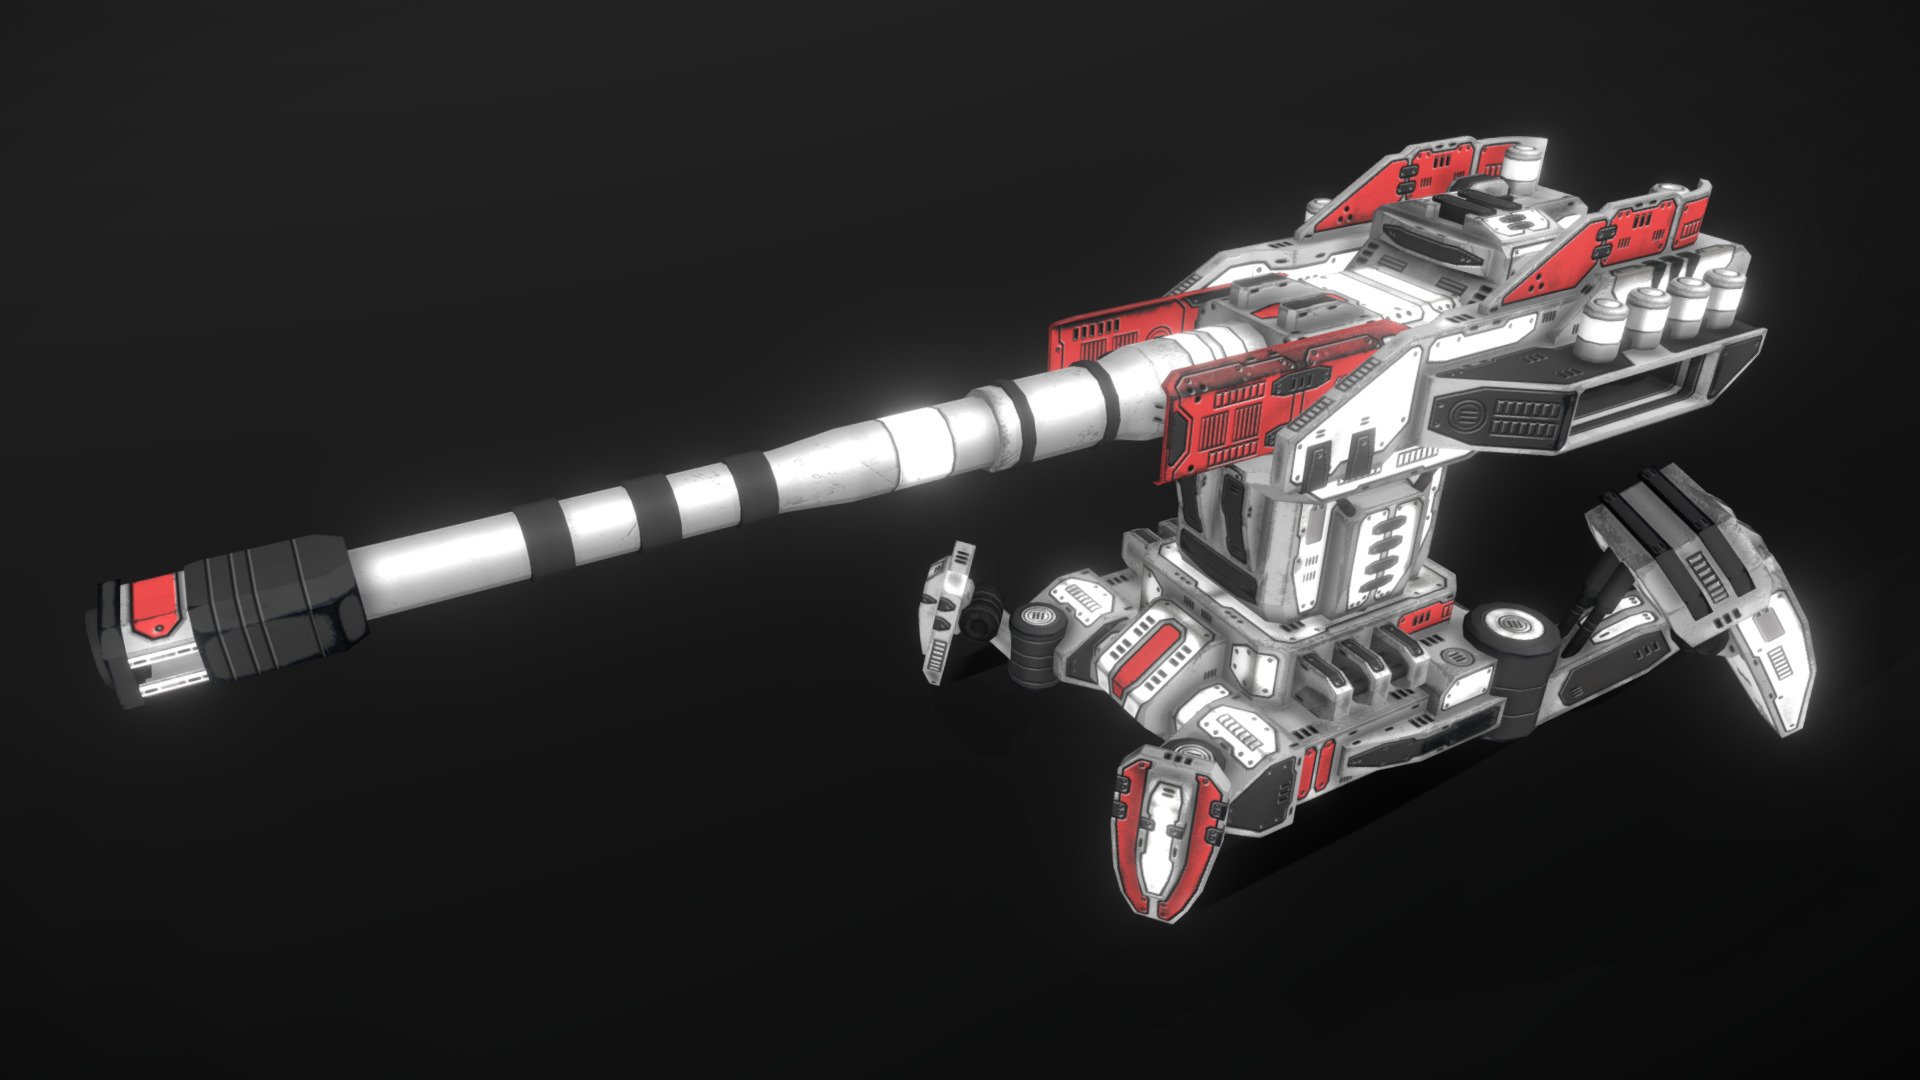 This is a model of a low-poly and game-ready scifi turret. 

The barrel(s) are separate meshes and can be animated with a keyframe animation tool. The turret can rotate left/right, the barrel can elevate up/down.

The model comes with several differently colored texture sets. The PSD file with intact layers is included.

If you have purchased this model please make sure to download the “additional file”.  It contains FBX and OBJ meshes, full resolution textures and the source PSDs with intact layers. The meshes are separate and can be animated (e.g. firing animations for gun barrels, rotating turrets, etc) 3d model